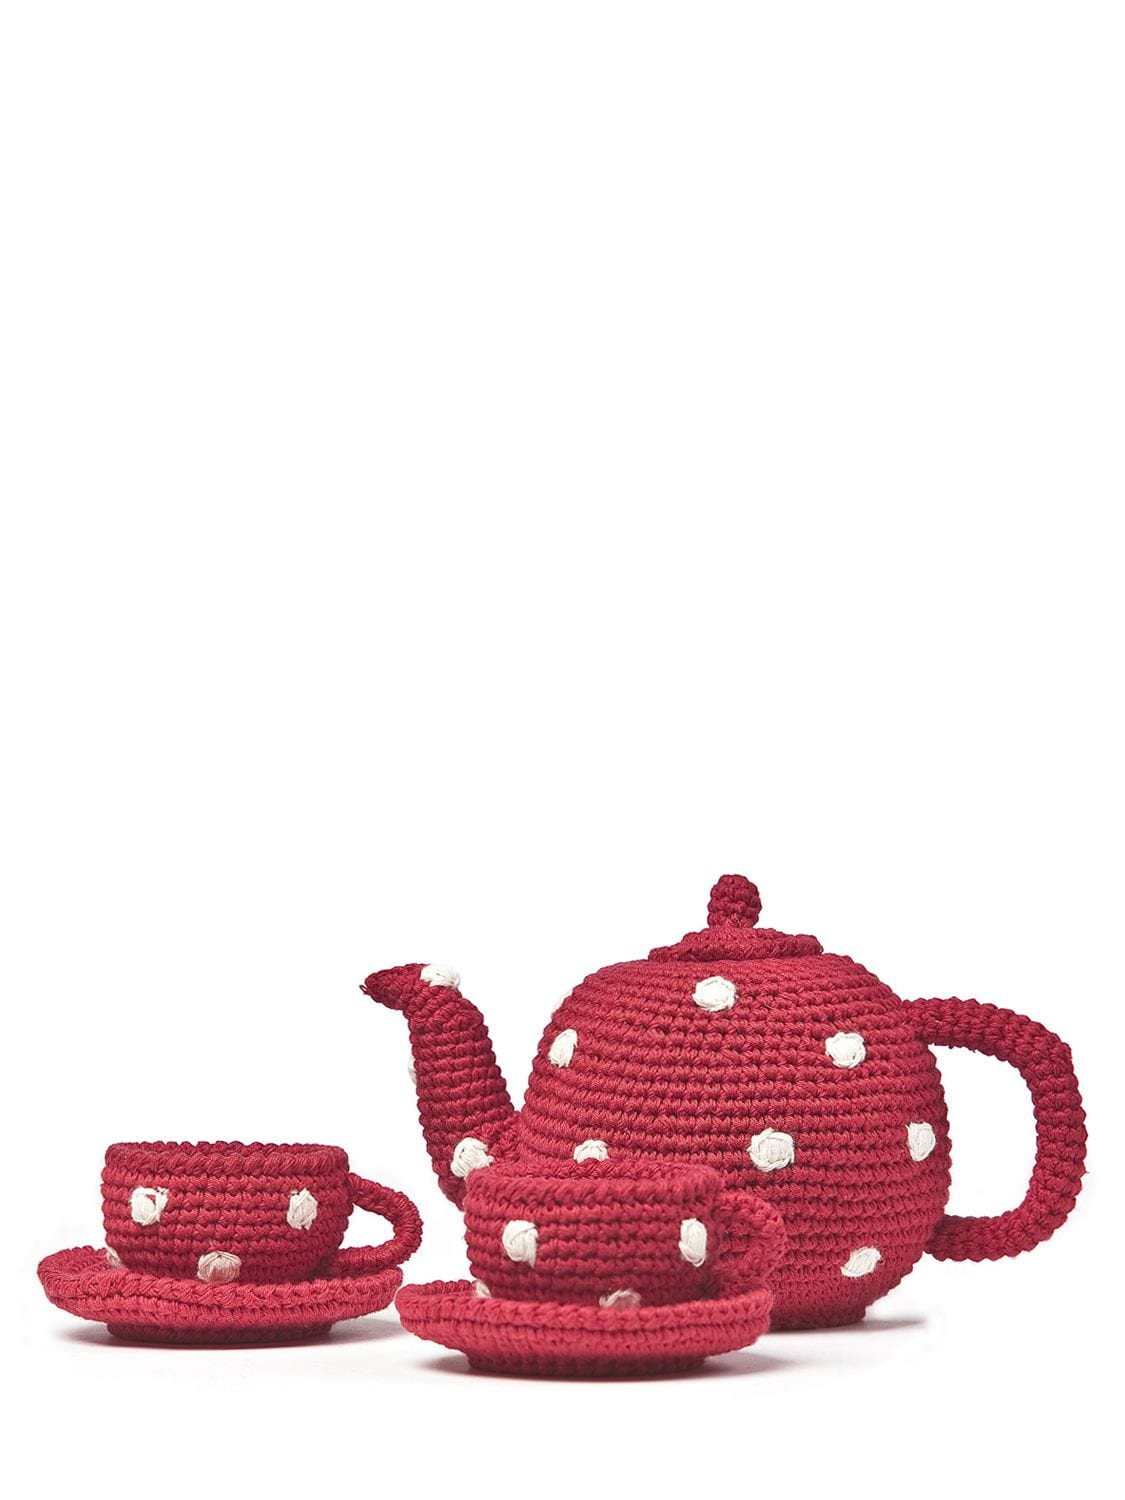 Anne-claire Petit Kids' Hand-crocheted Organic Cotton Tea Set In Red